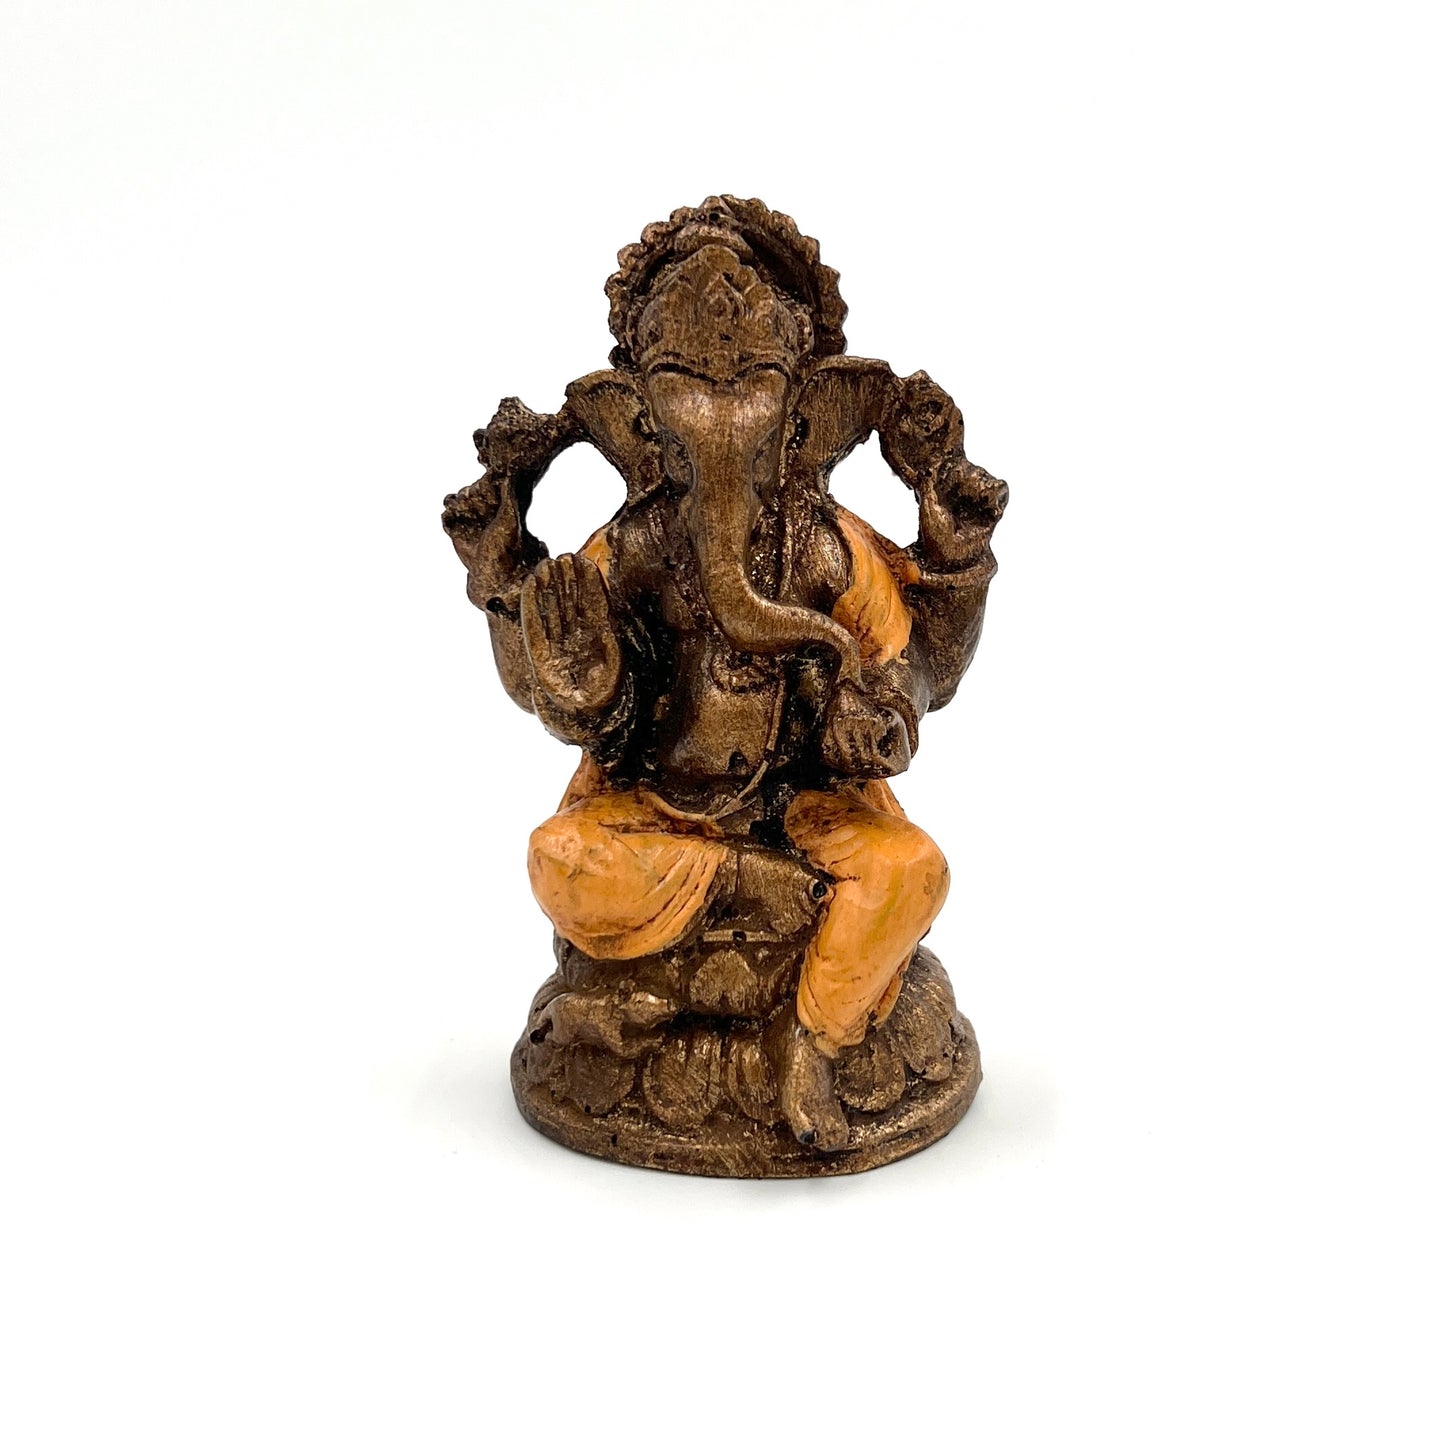 Hand Painted Resin Ganesh Statues